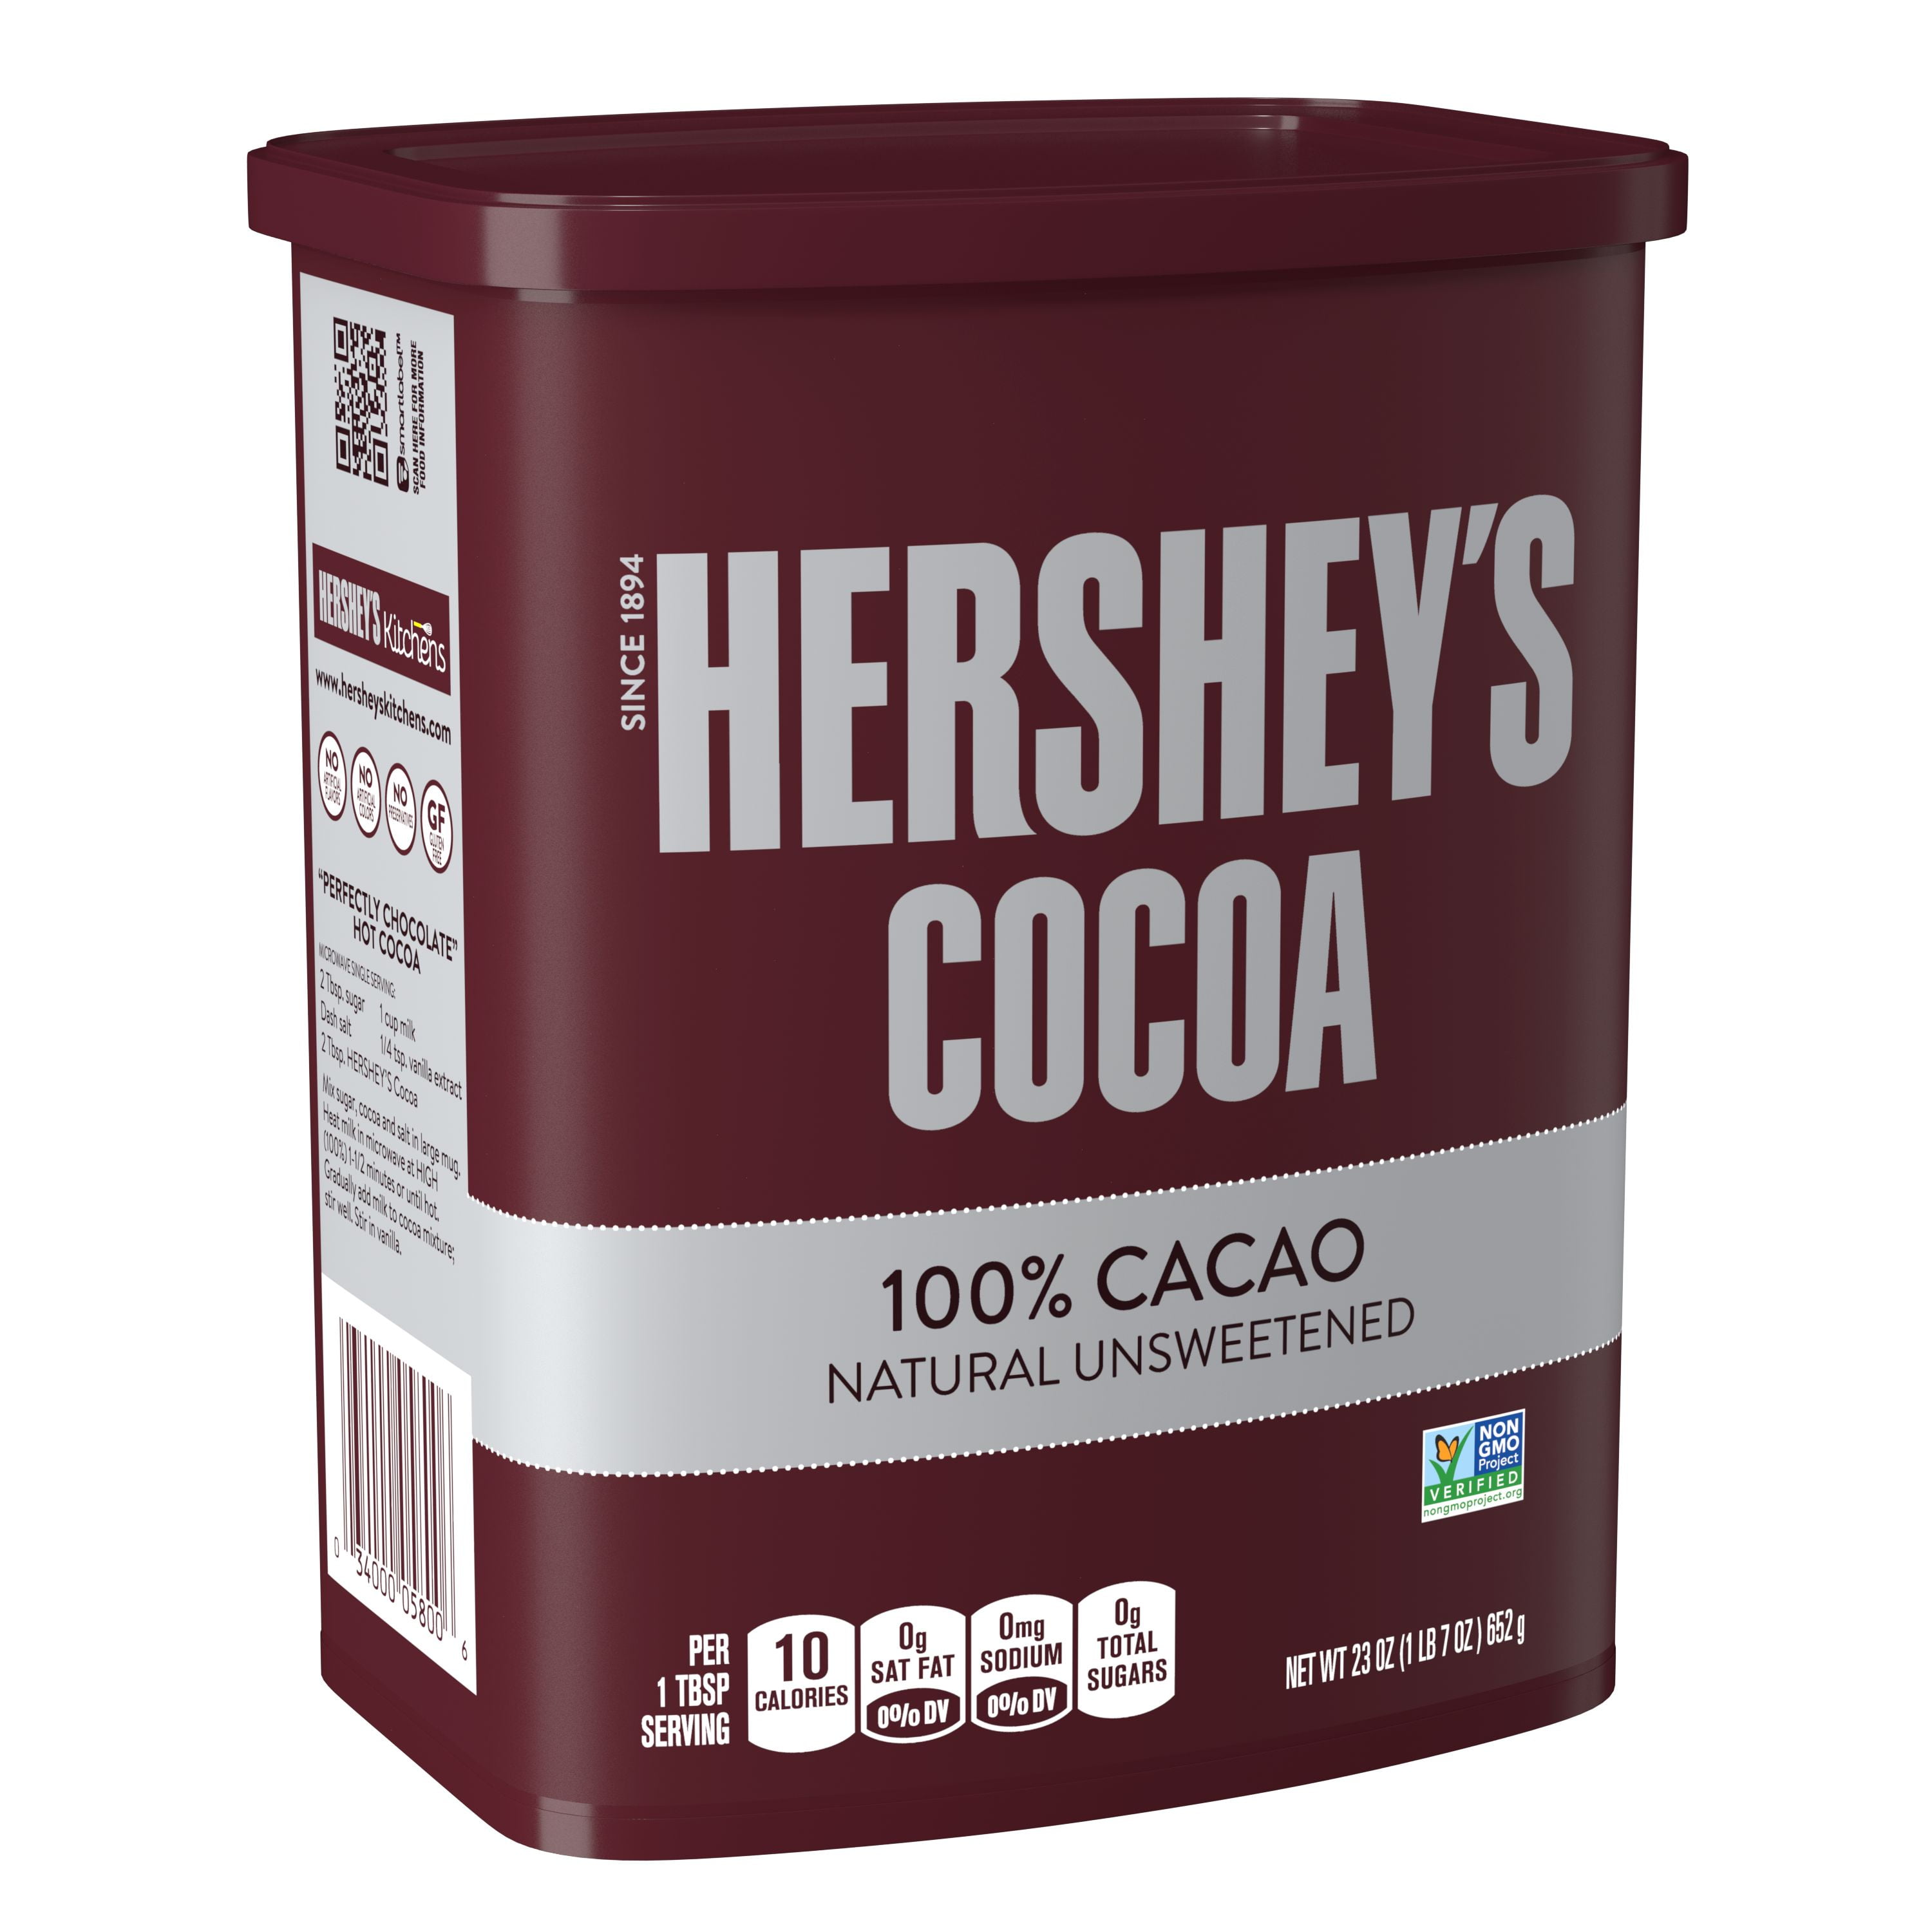 HERSHEY'S, Naturally Unsweetened Cocoa, Baking Cocoa, 23 oz, Container